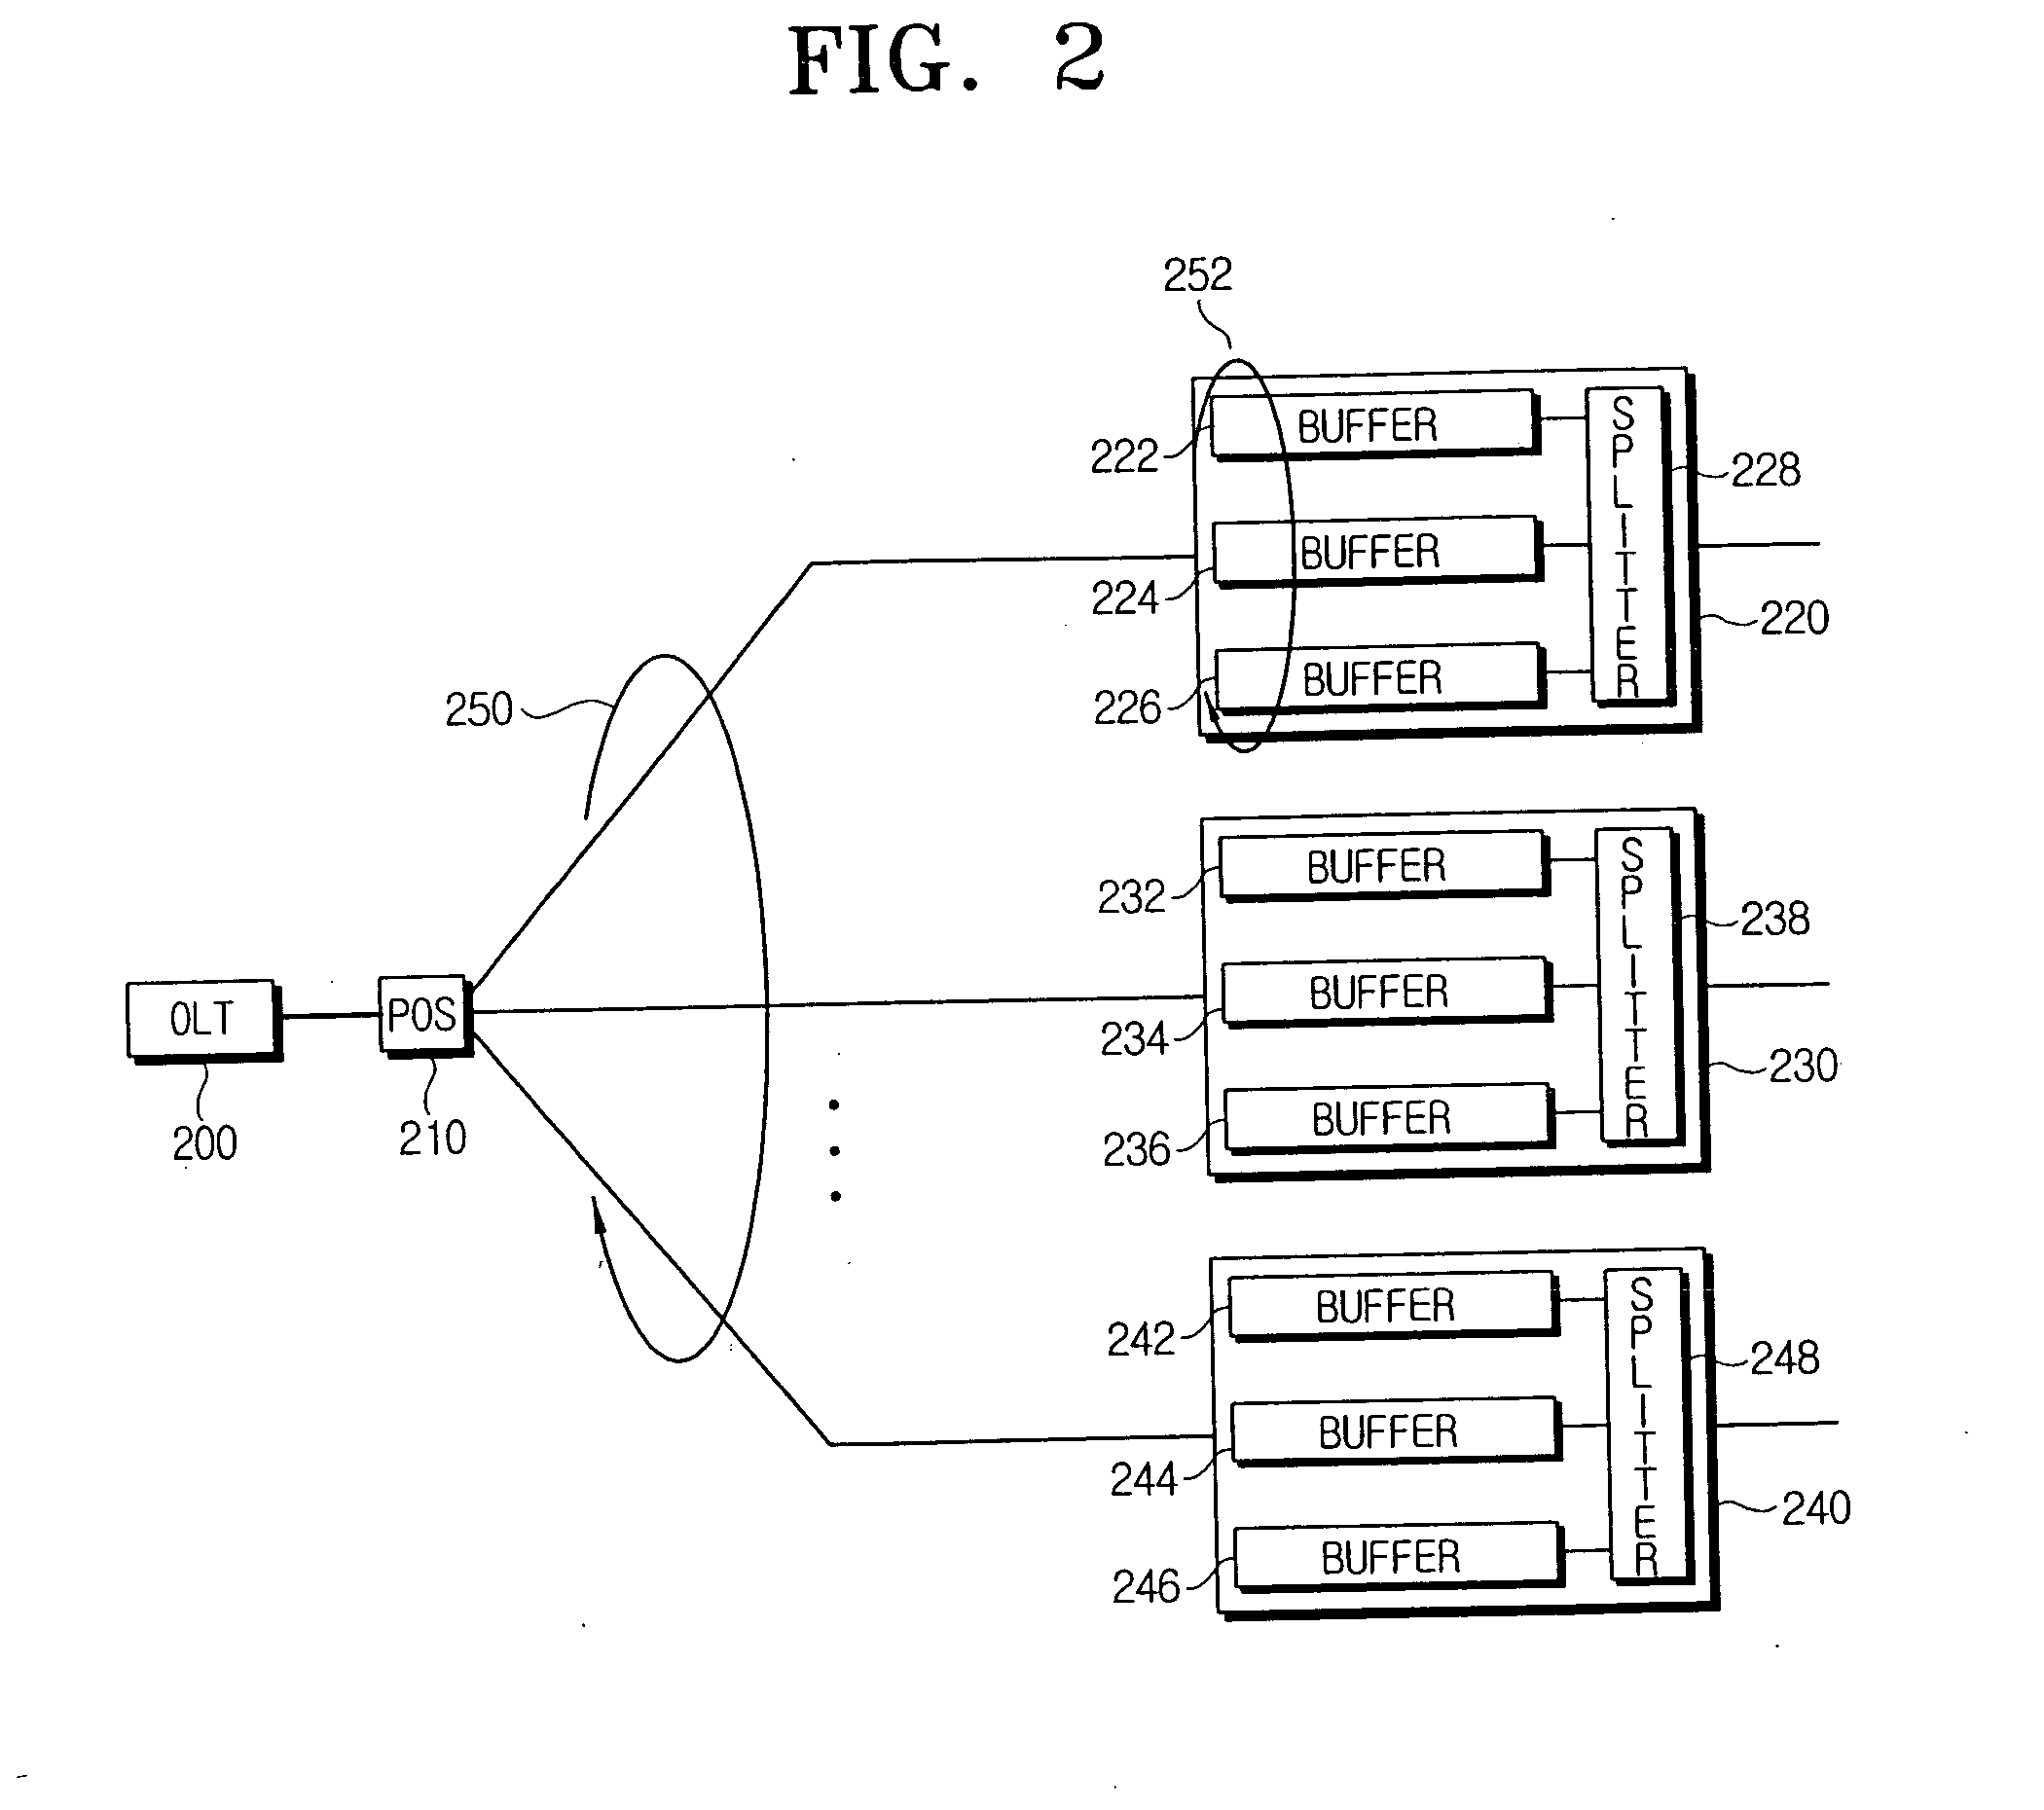 Bandwidth allocation method and system for data transmission in EPON